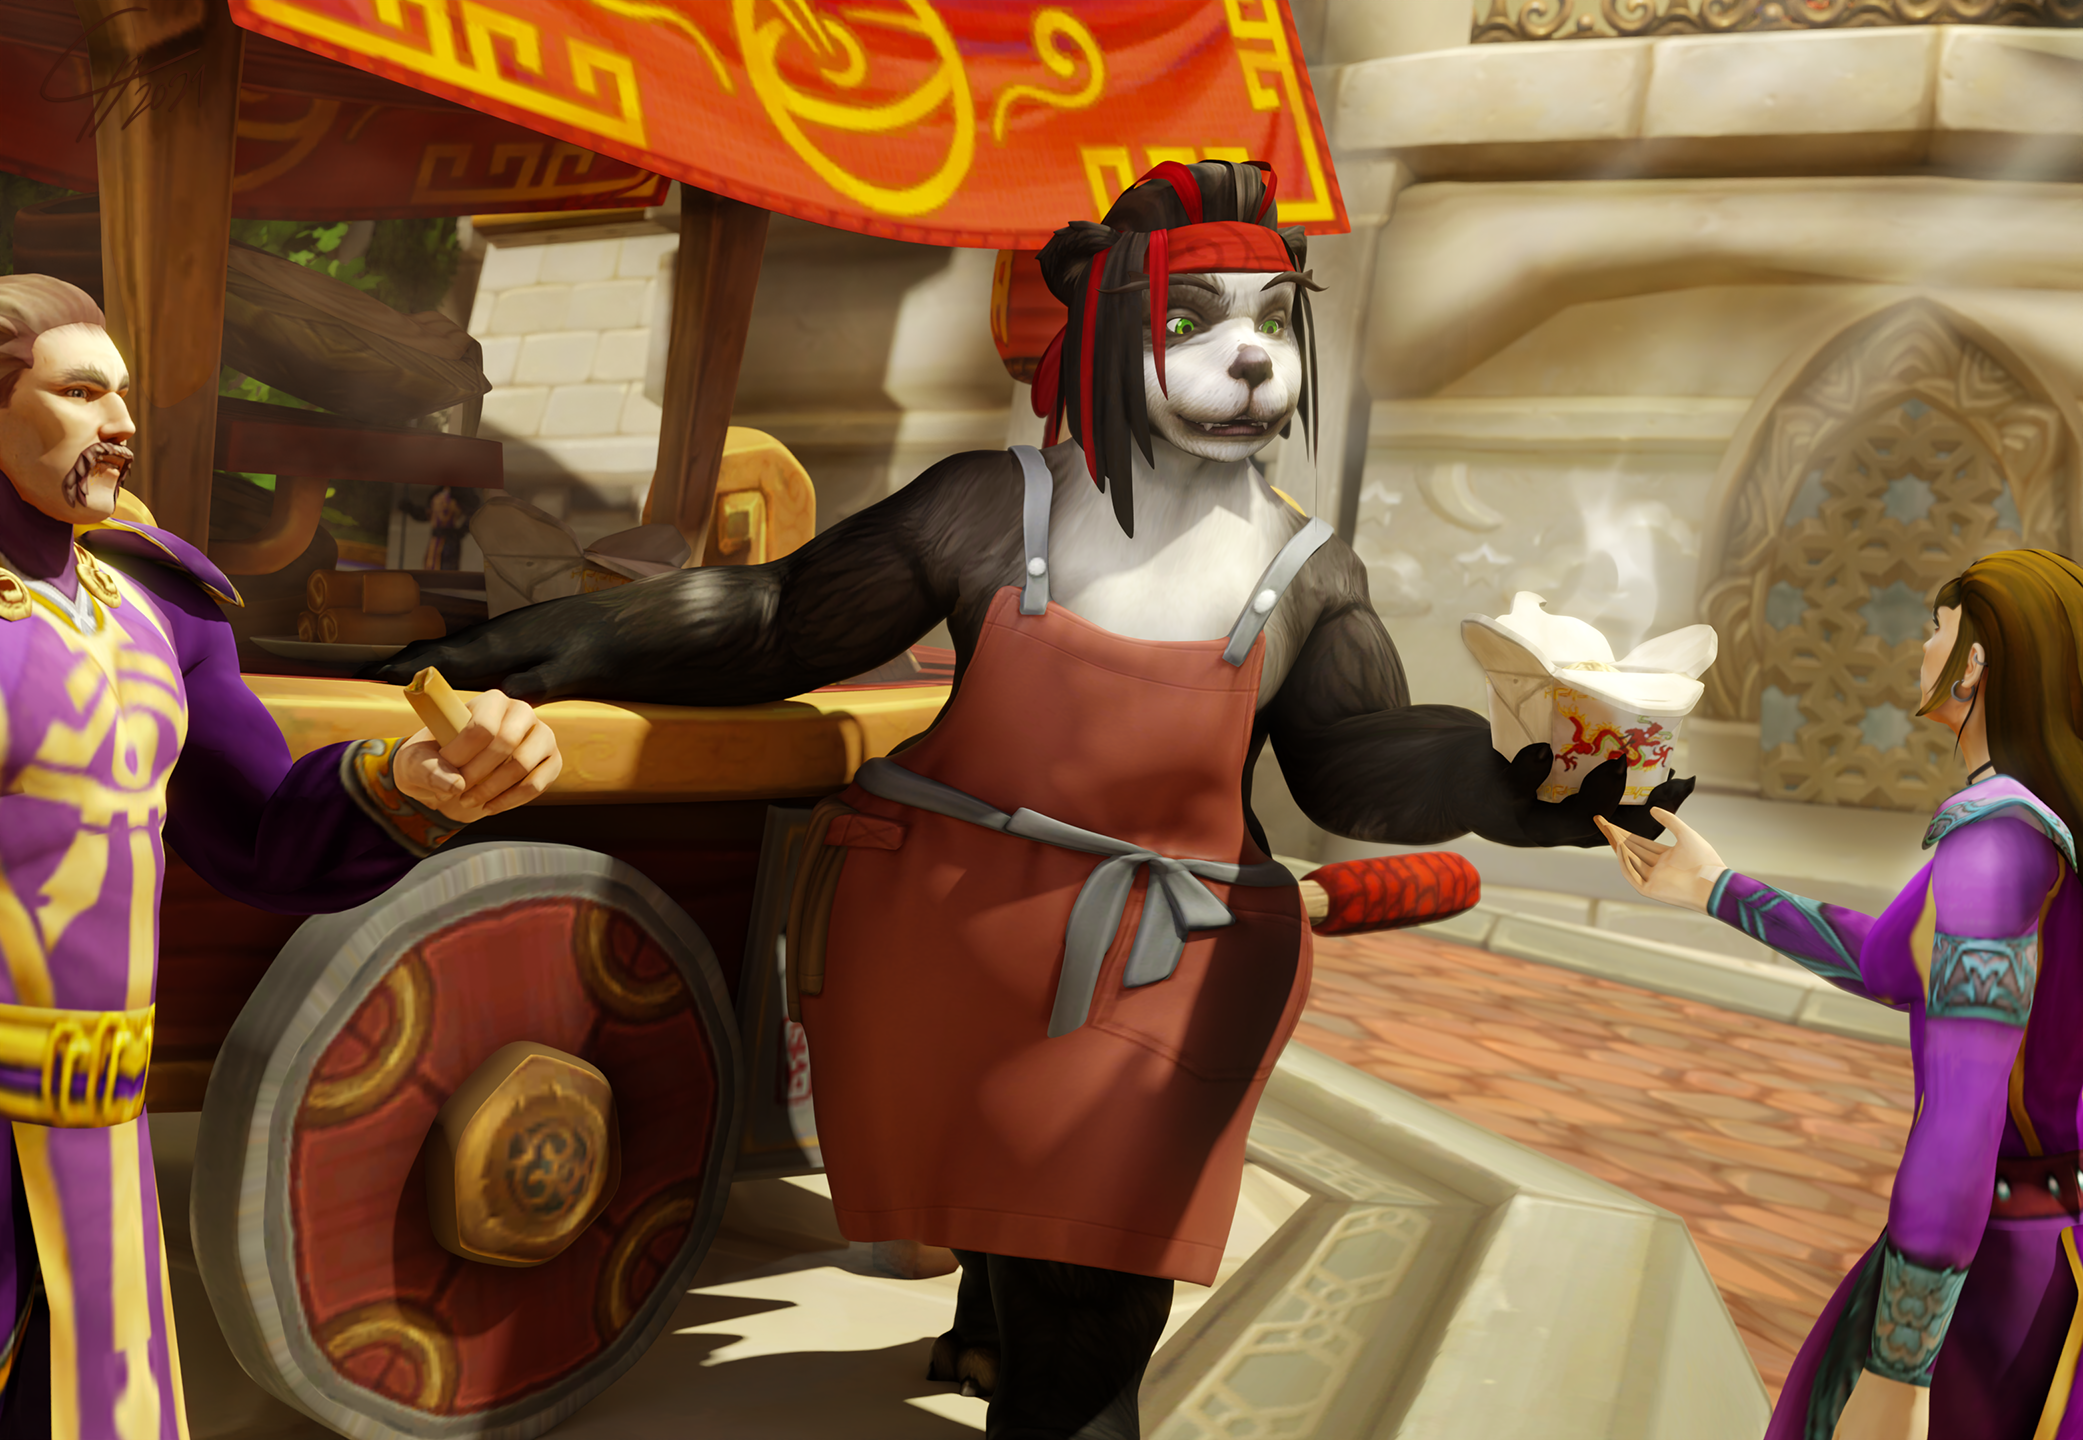 Traveling Noodle Vendor [Pandaren/SFW]
Ever since the protective mists surrounding
Pandaria dissipated, Chunho Irontummy,
had wanted to travel far and wide.
To see the world and share the joy of his
family noodle recipe(to finance his tour).
[b][url=http://bakaras.com/murlocish/albums/userpics/10001/18/NoodleVendor2021XL.png]==XL-Size Edit==[/url]
Keywords: OC;Pandaren;SFW